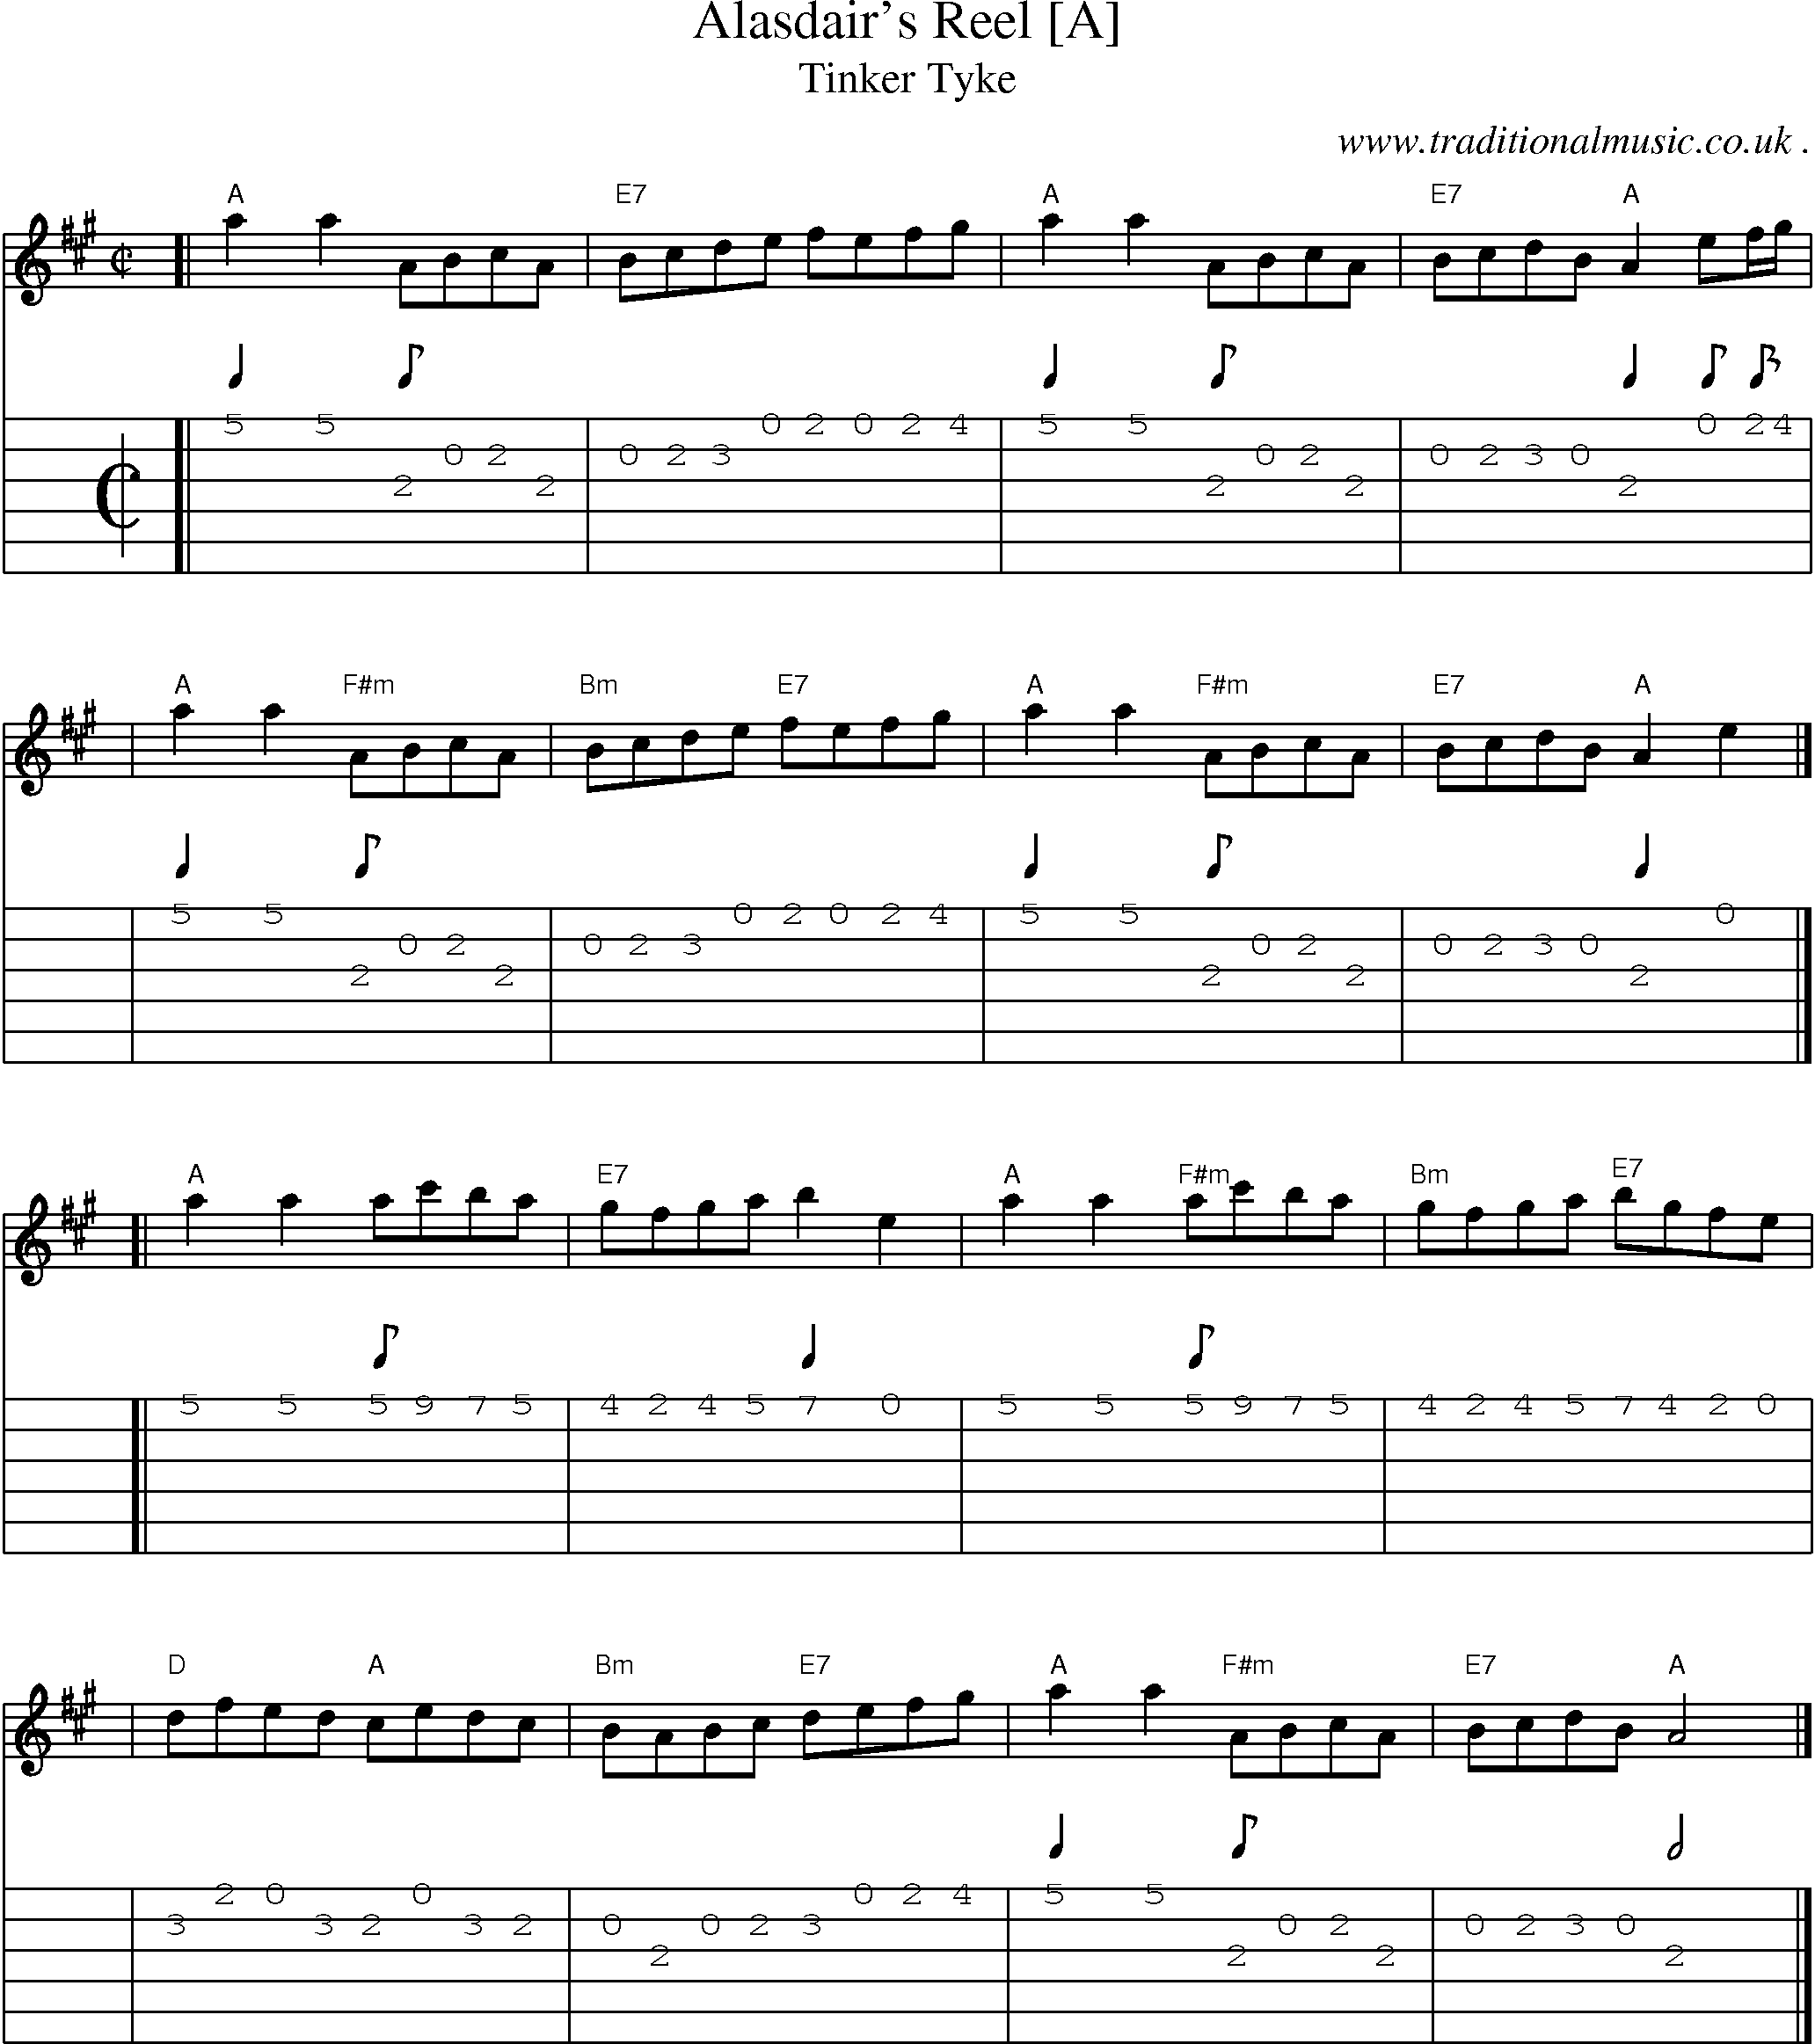 Sheet-music  score, Chords and Guitar Tabs for Alasdairs Reel [a]